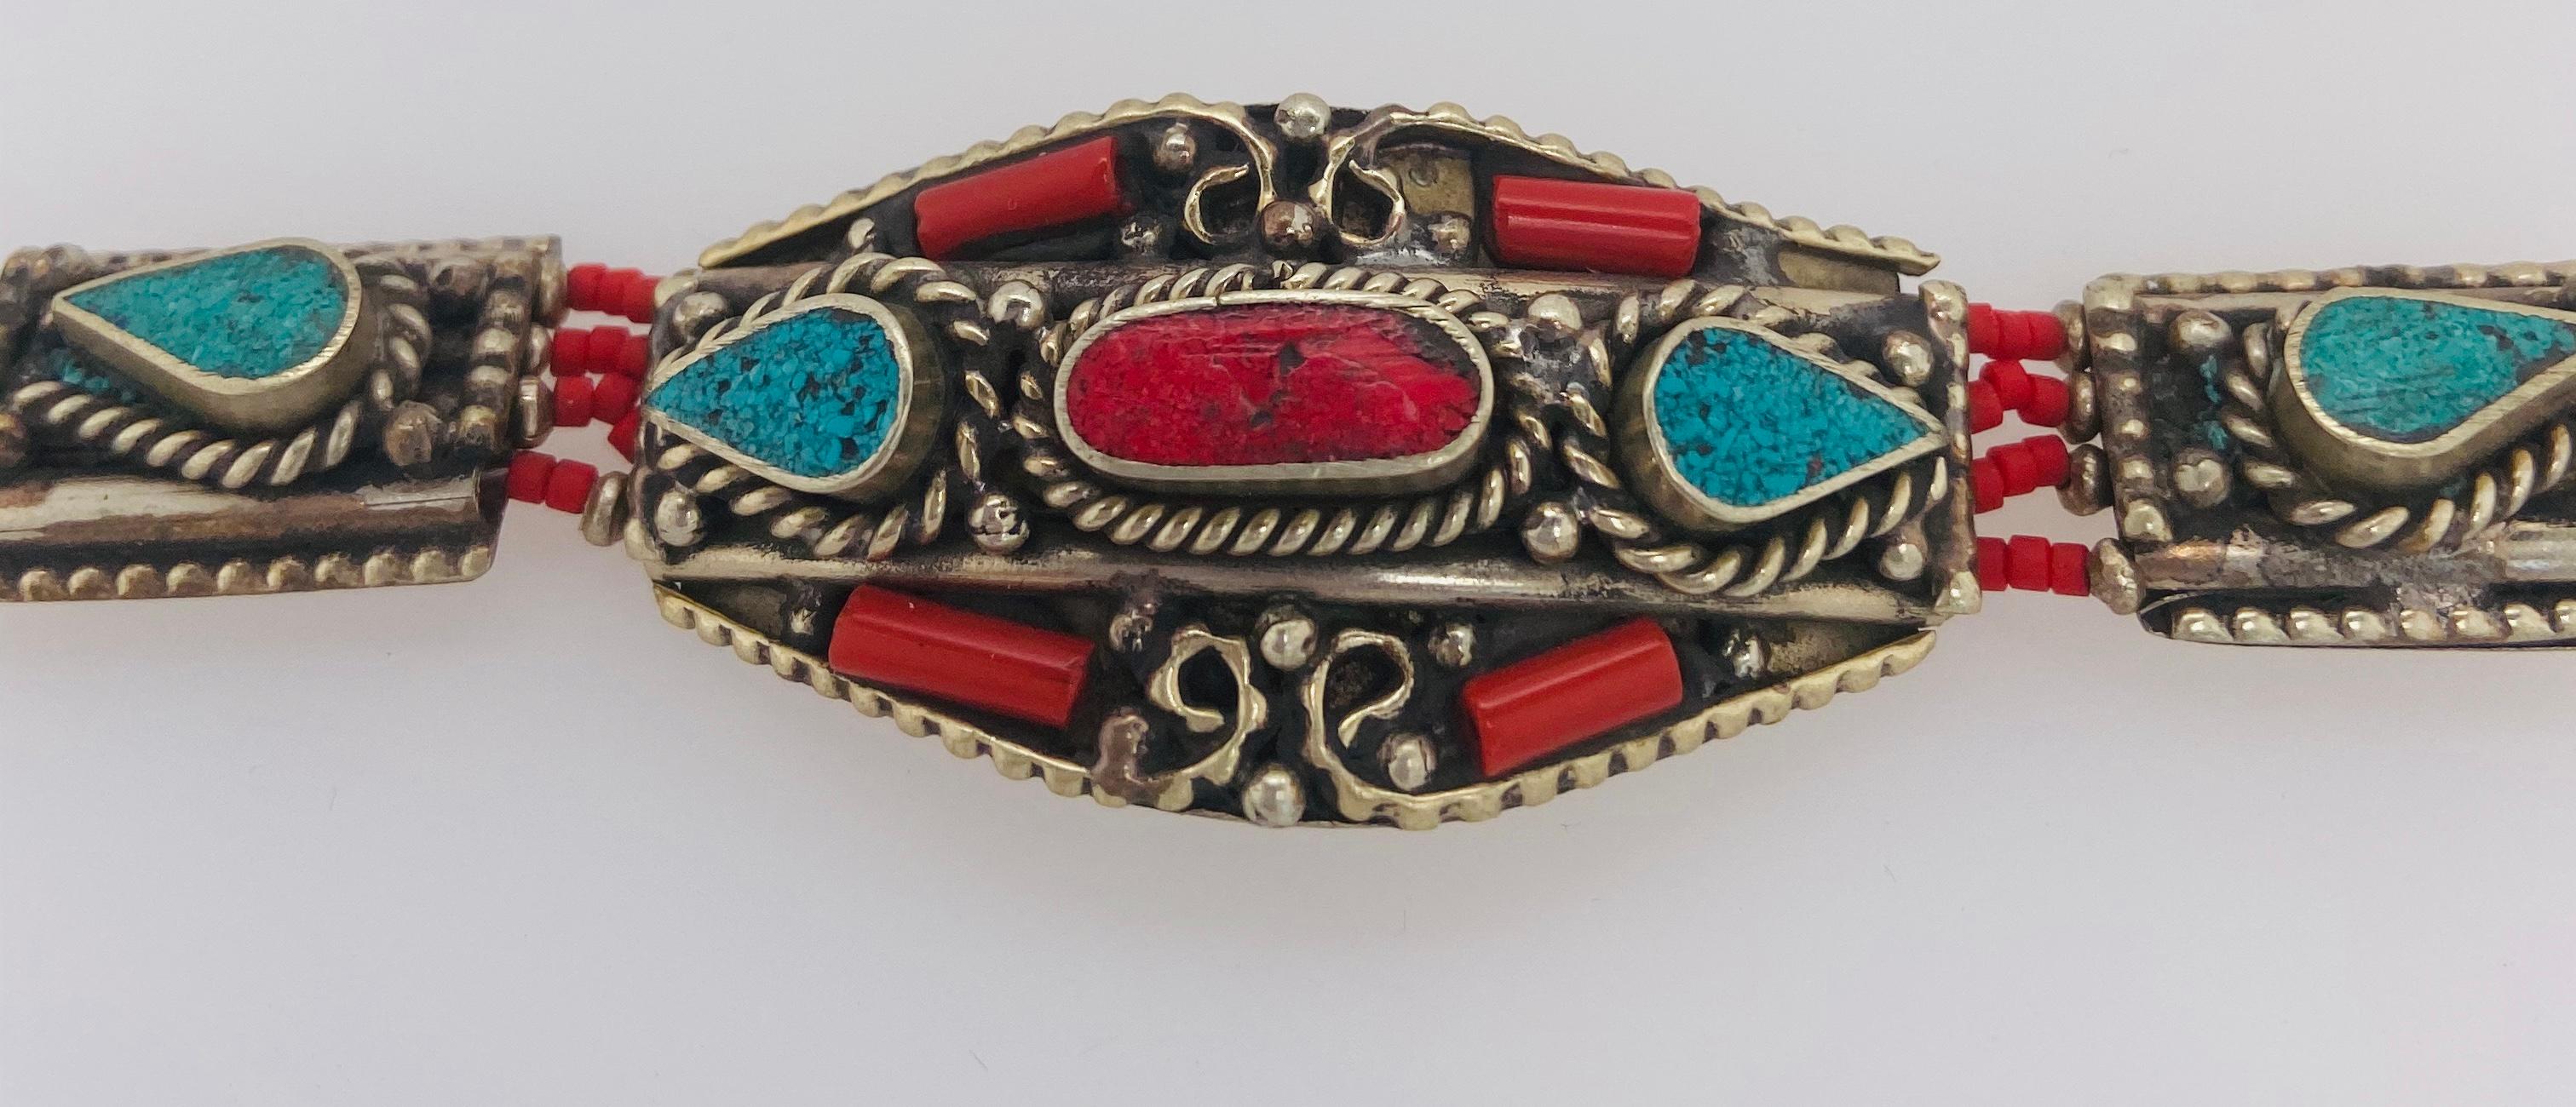 Midcentury Moroccan Tribal Silver Bracelet with Turquoise and Red Stones For Sale 5